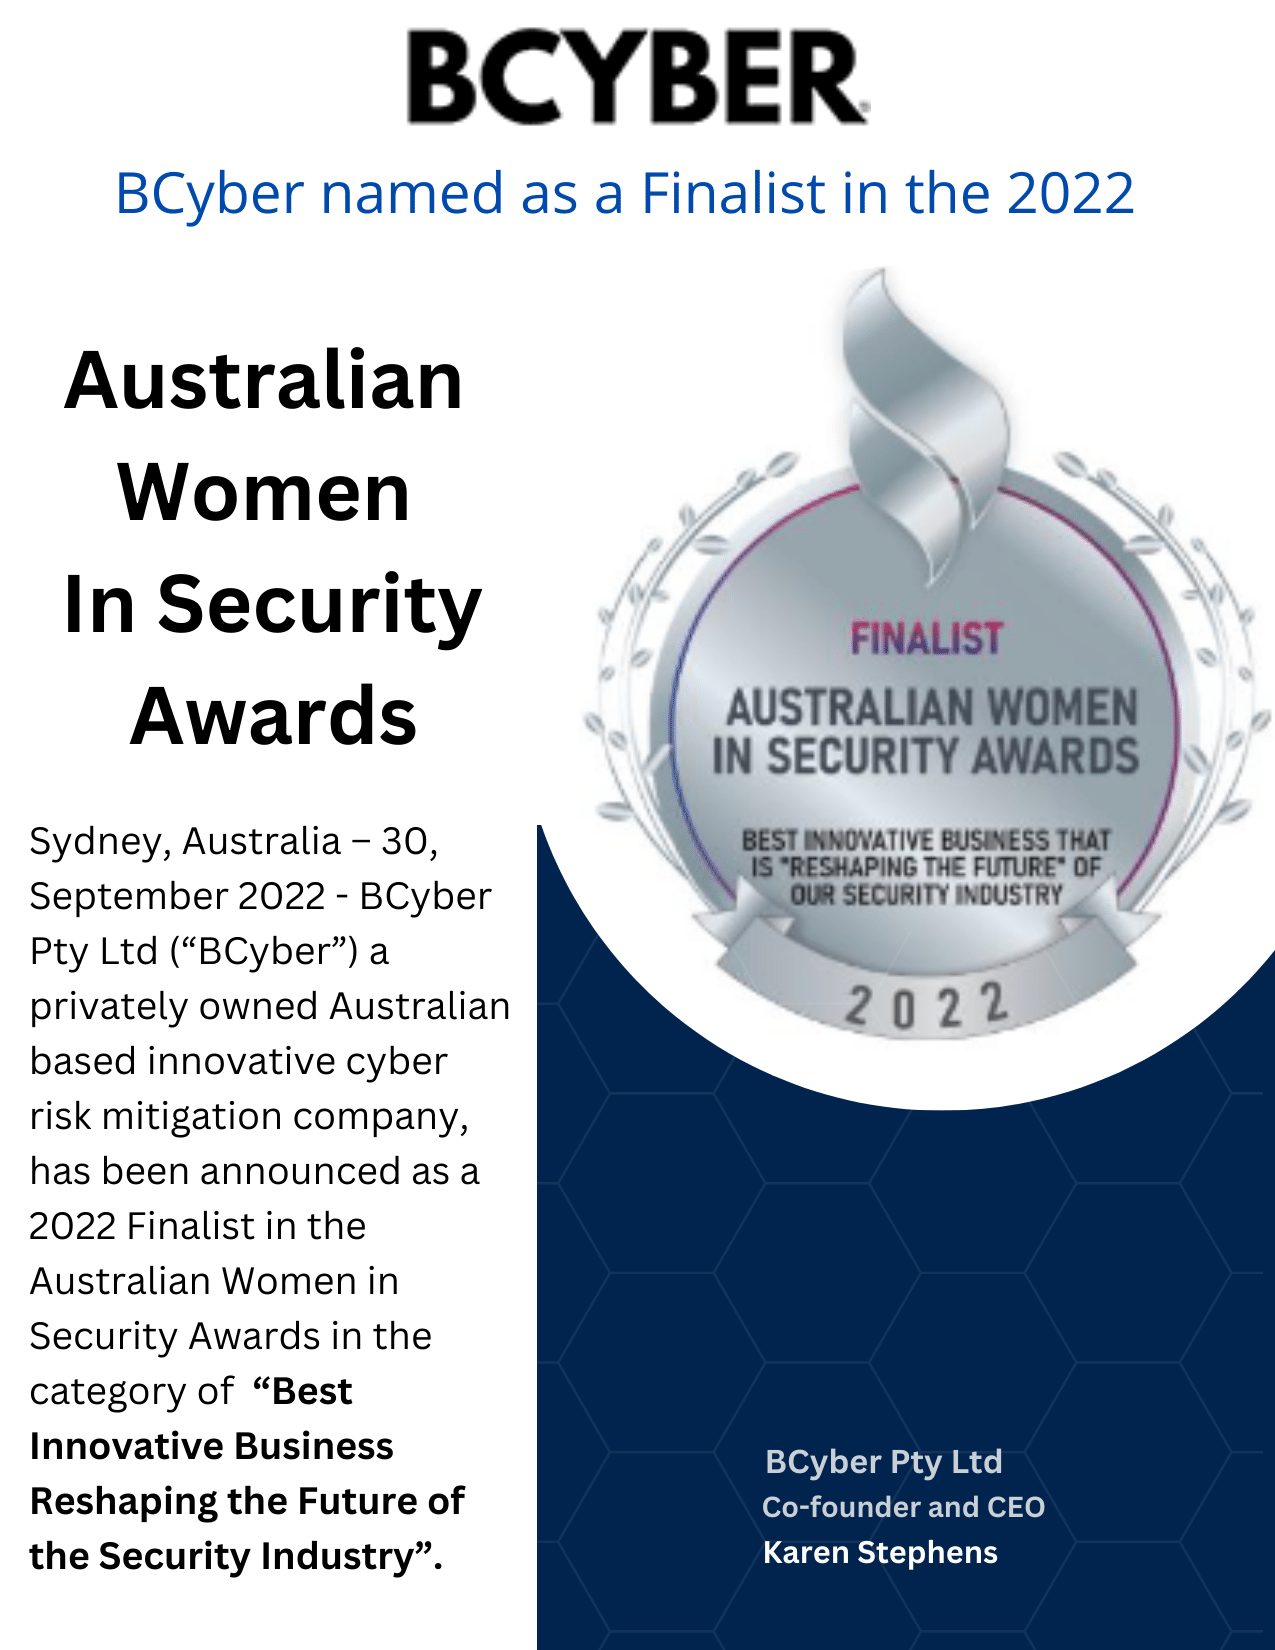 BCyber named as a Finalist in the 2022 Australian Women In Security Awards